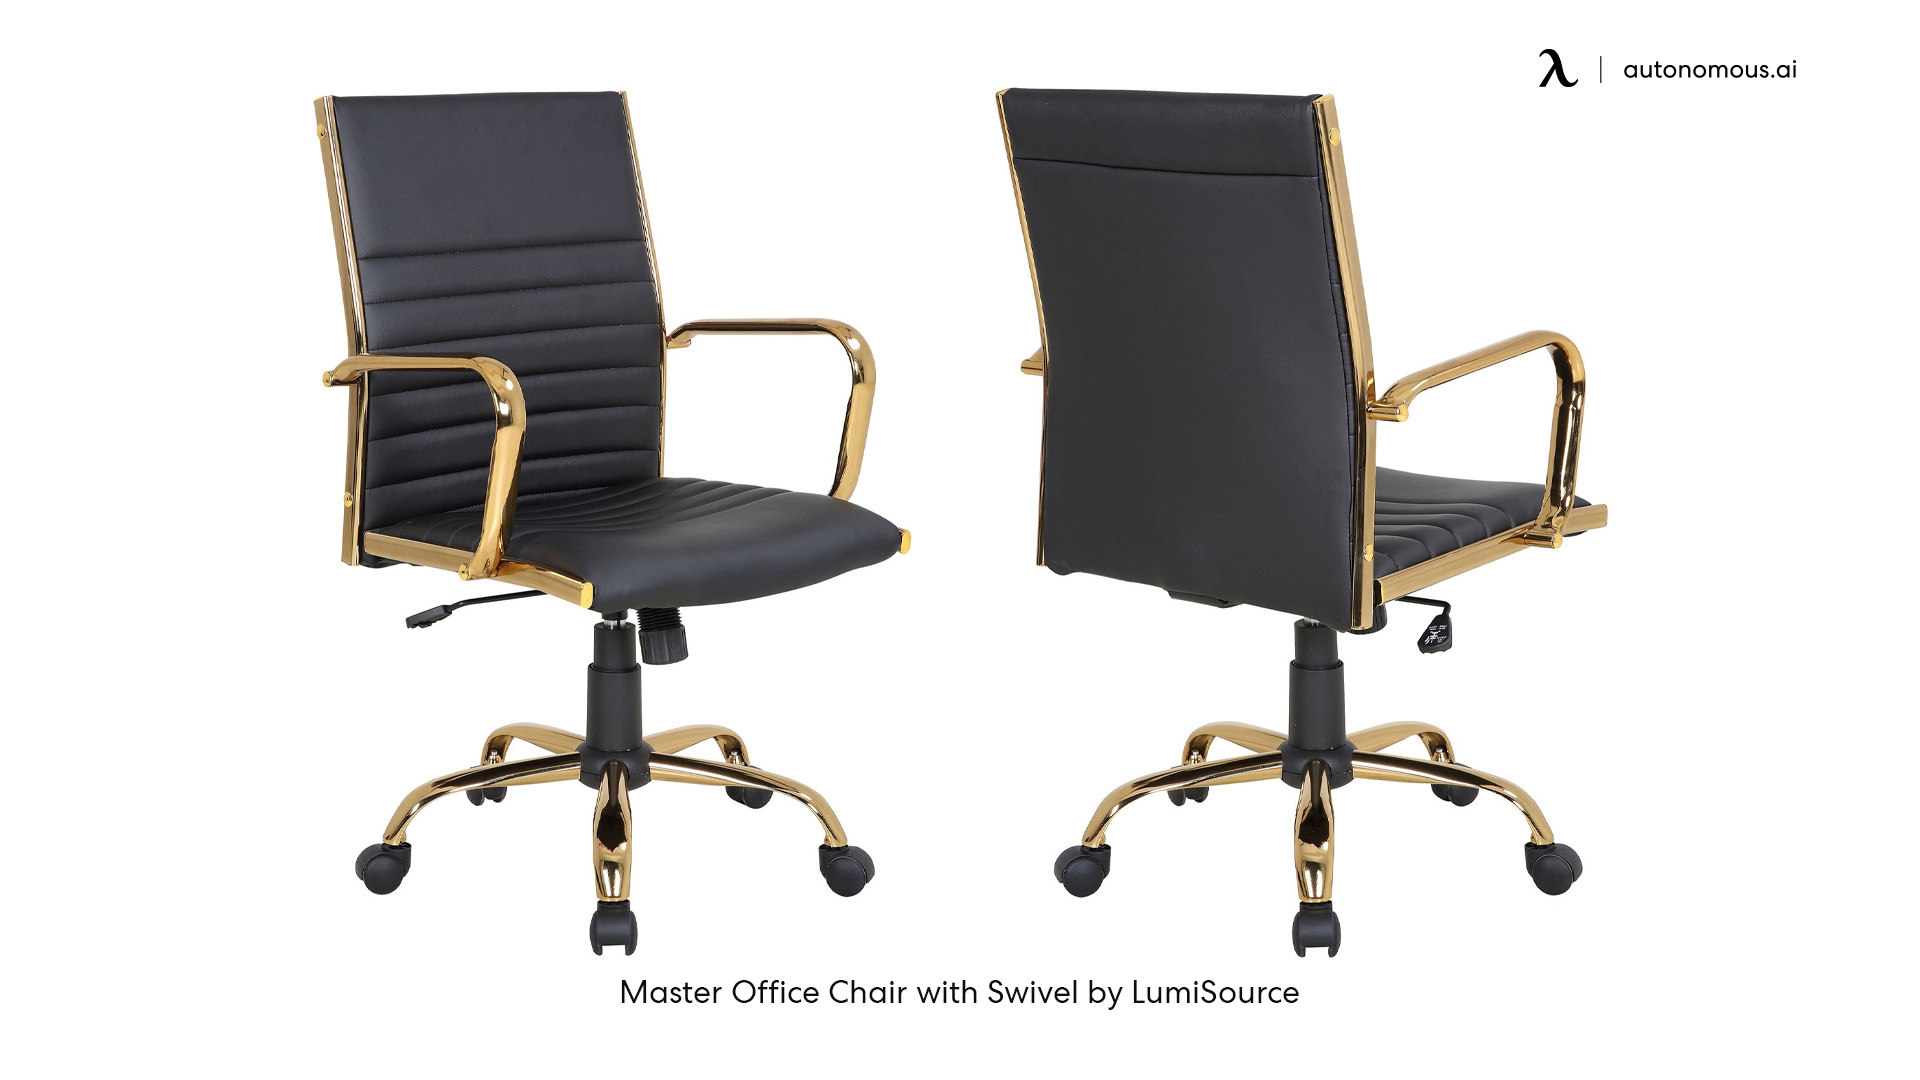 Master Office Chair by LumiSource